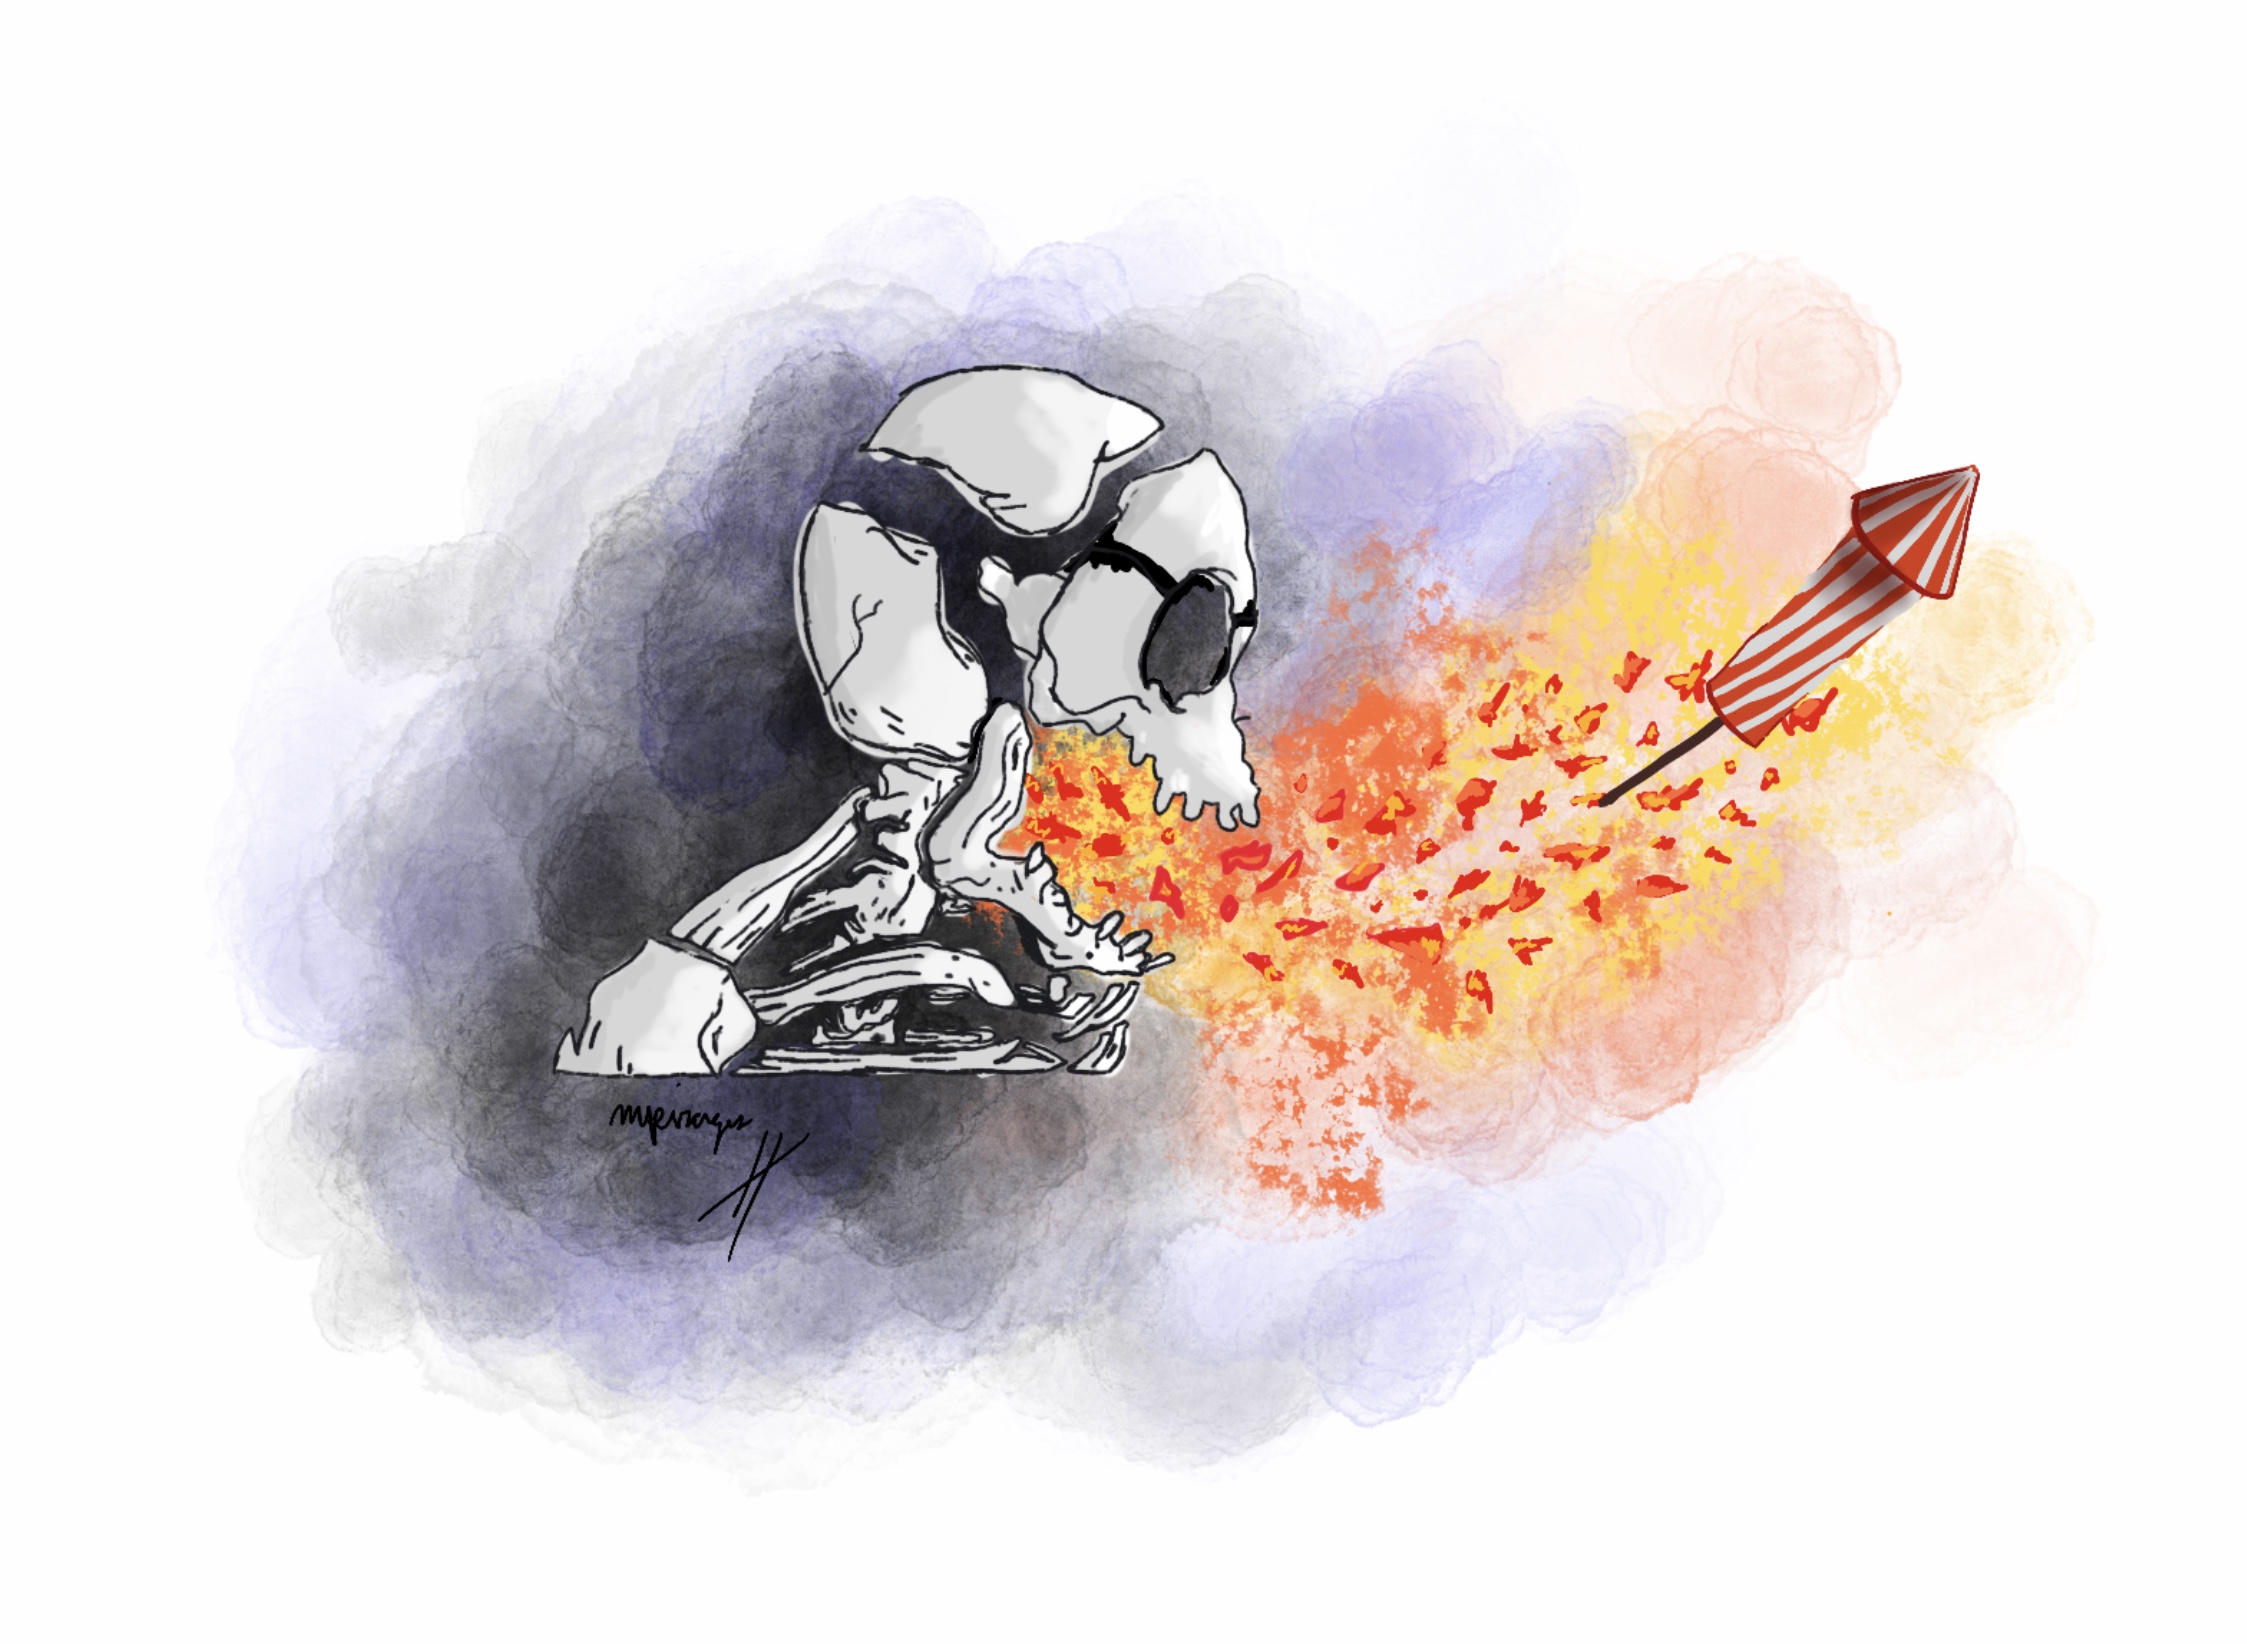 a landscape drawing of a skeleton from the shoulders up breathing fire. The background is white with a spattering of blue, black, and orange. Coming out of the fire is a red and white stripped firework flying out of the skeleton's mouth.